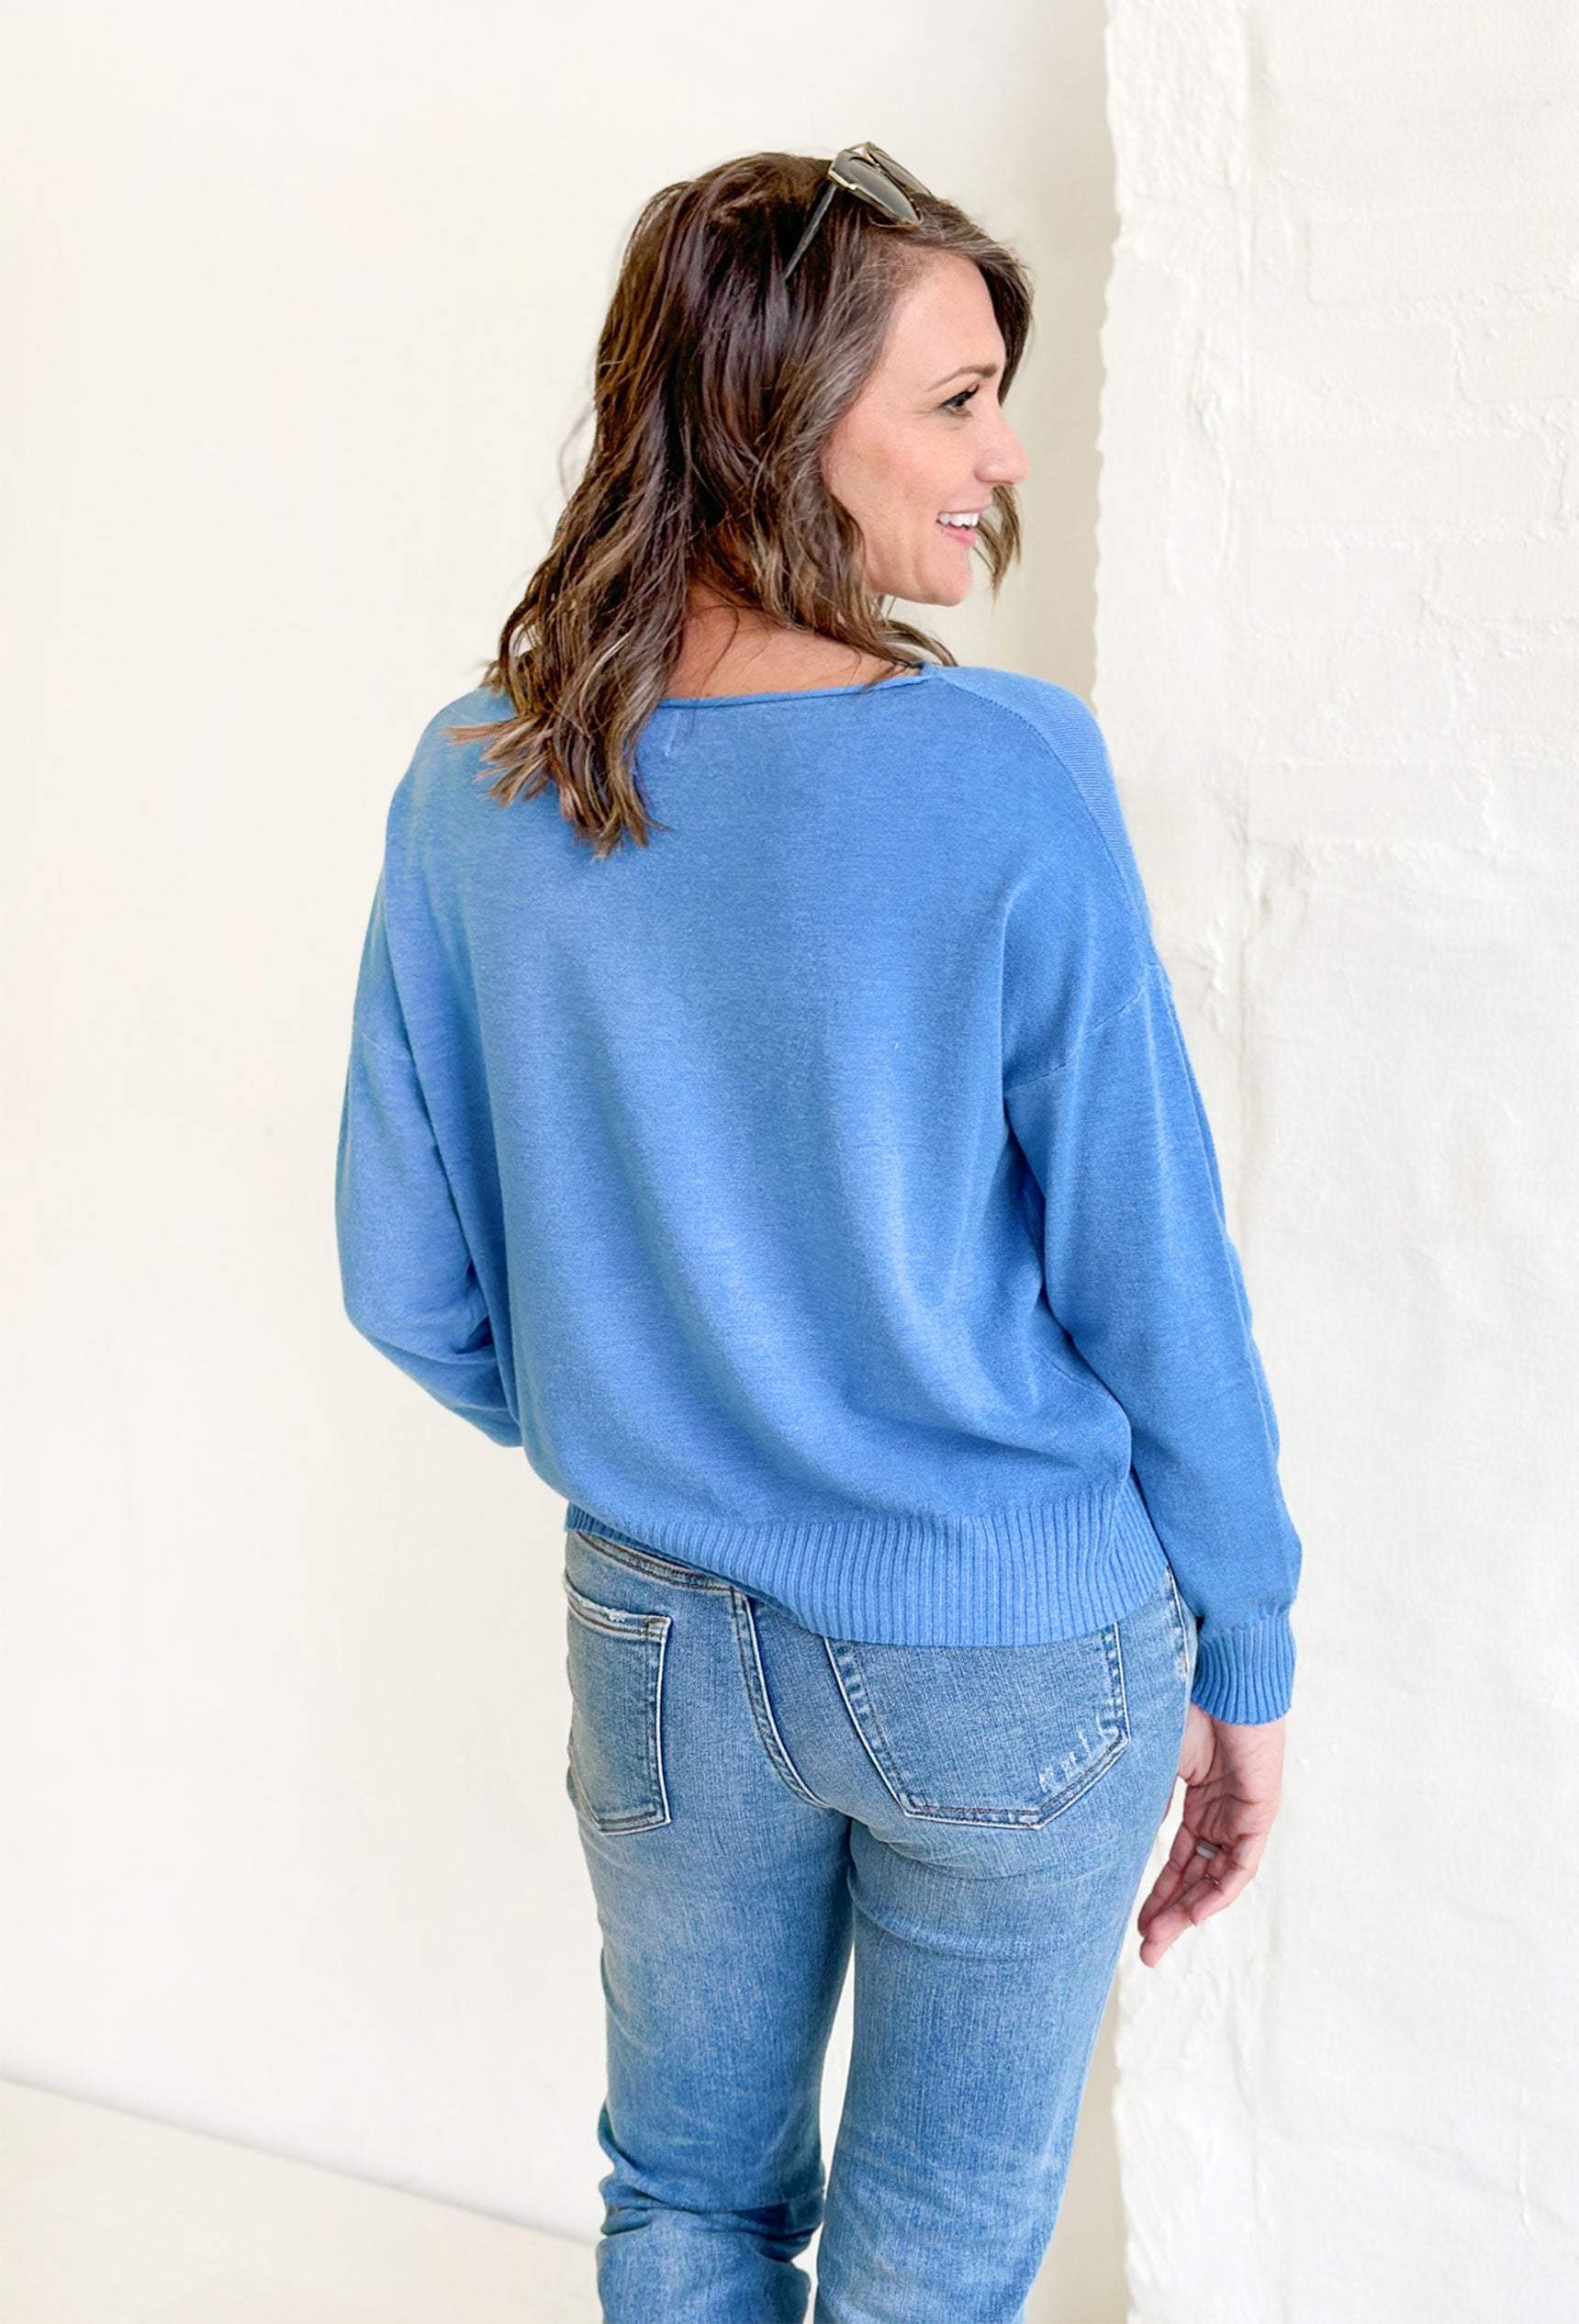 Lilly Sweater by Dreamers in Azure, blue wide neck light weight sweater